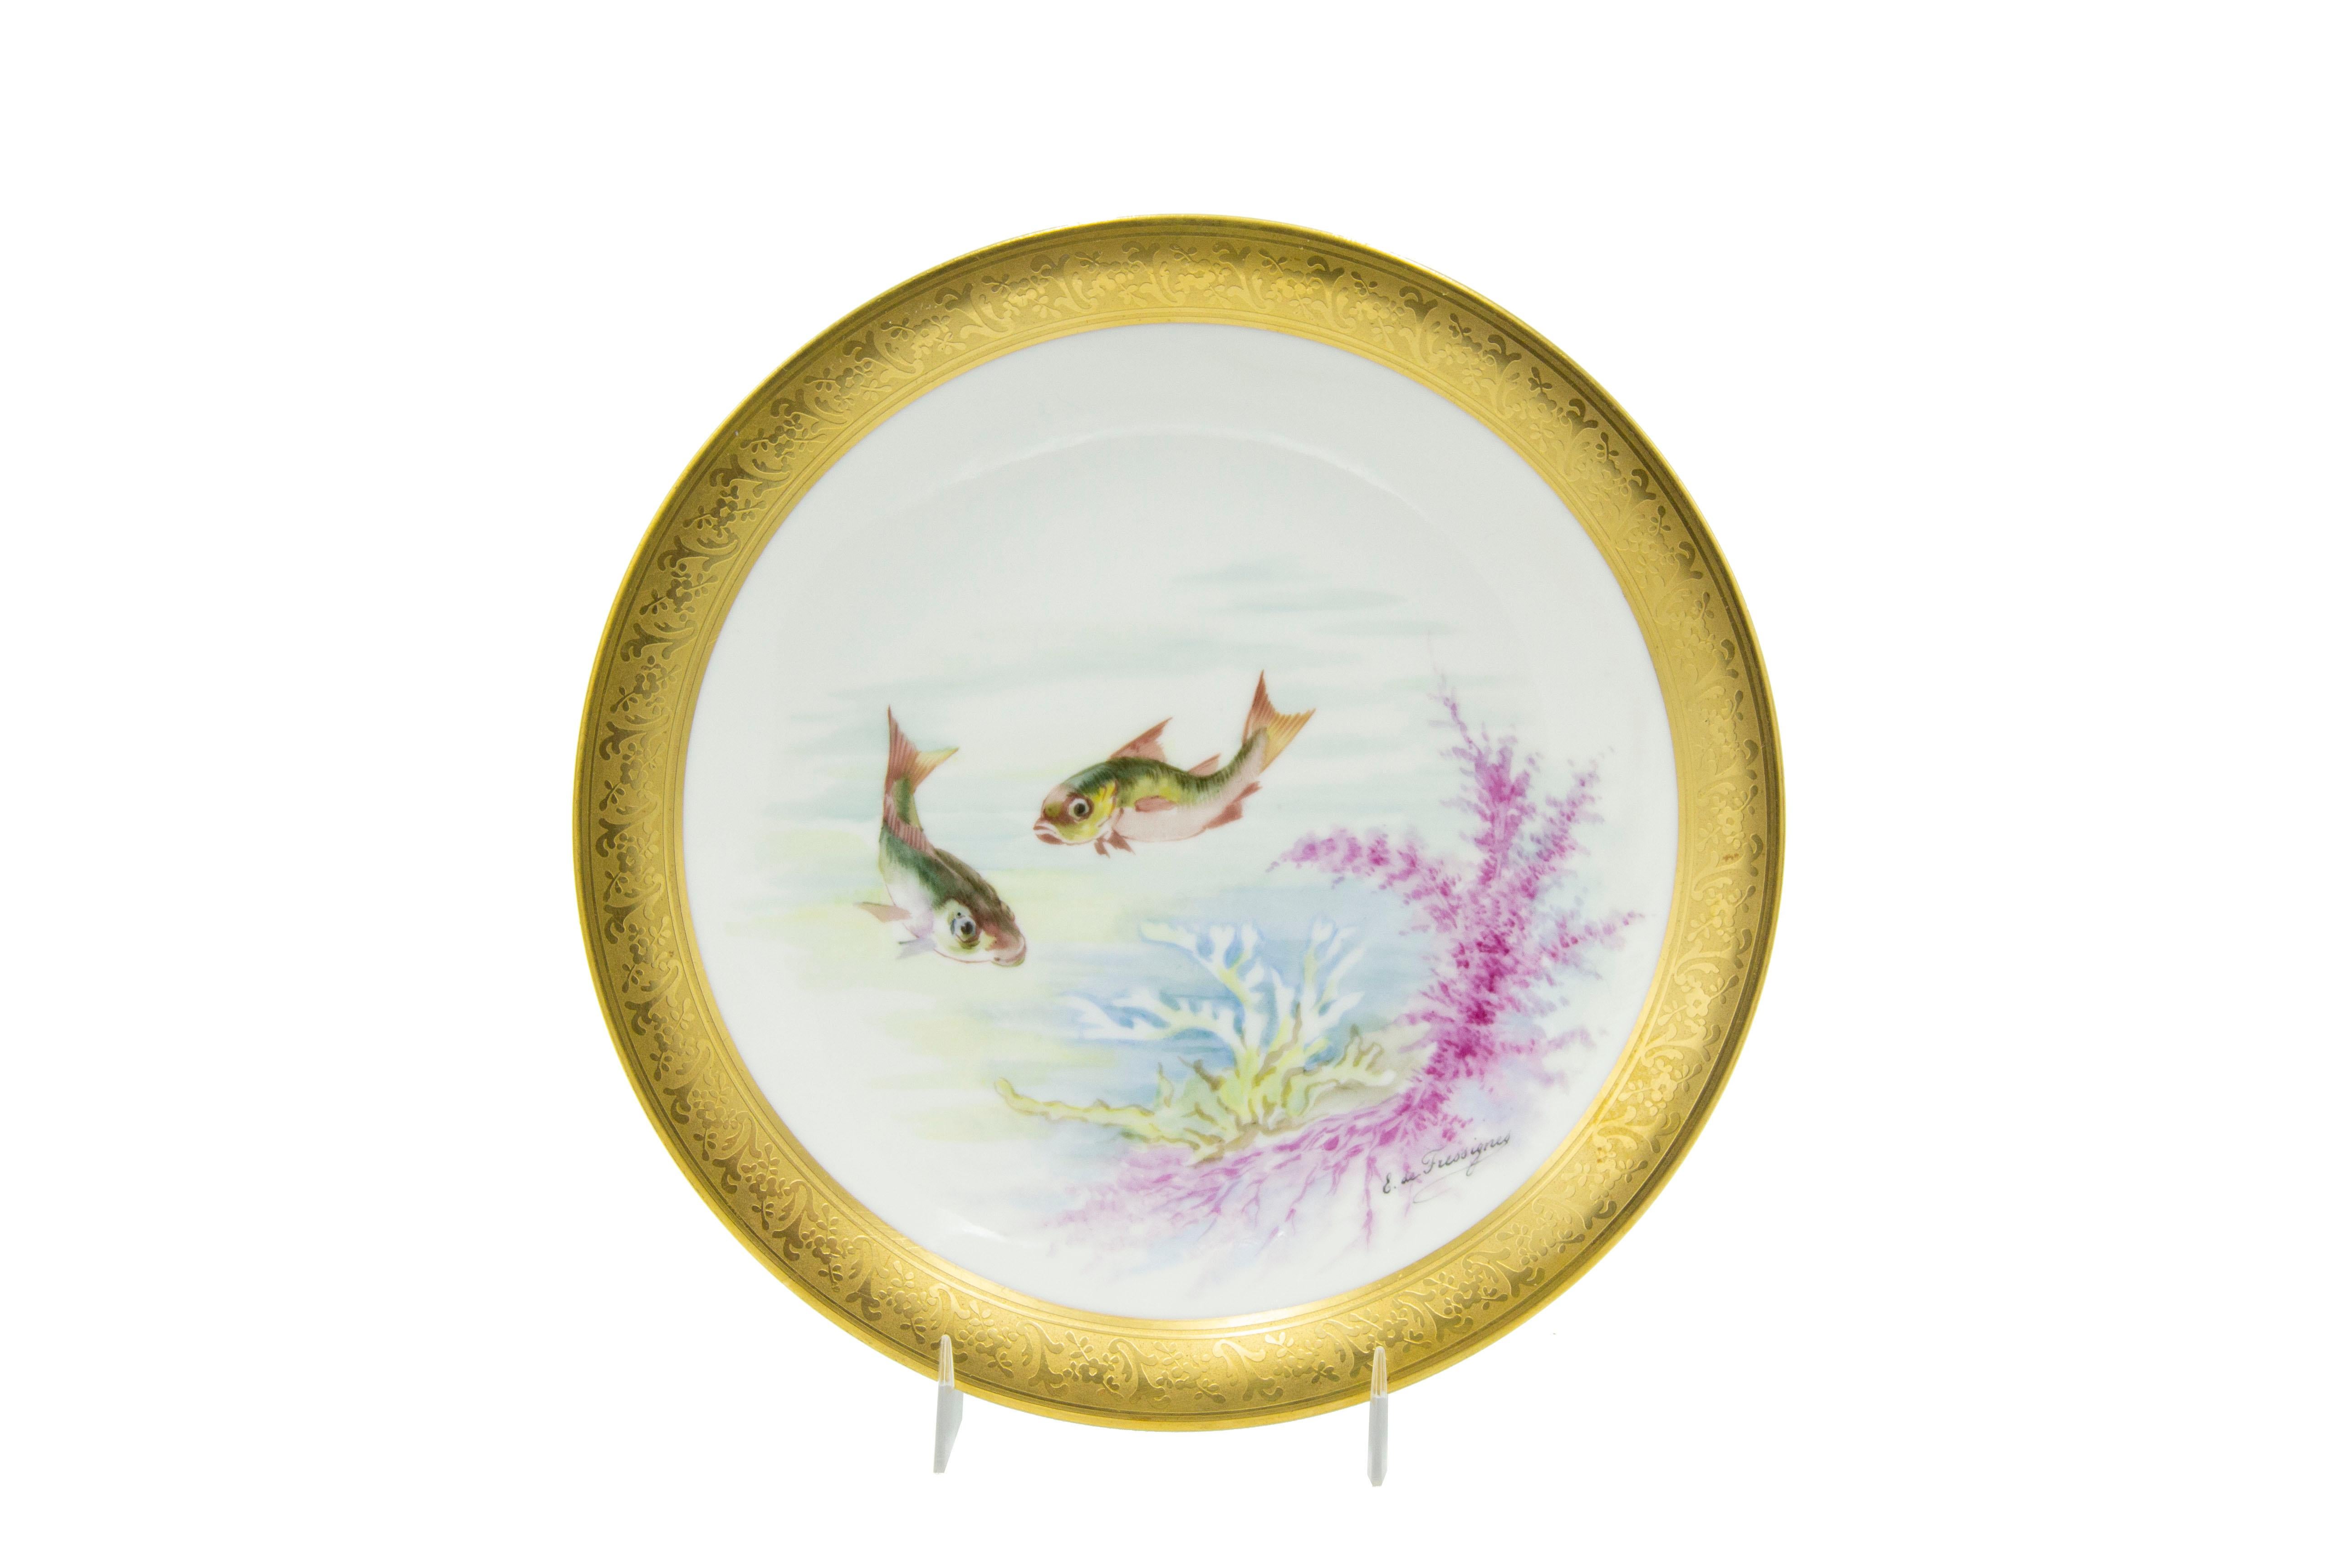 Set of 12 French Victorian-style (Early 20th Century) porcelain plates with gilt border and depicting fish, designed and signed E. de Fressignes (by Elite of Paris for Bawo & Dotter of New York)
